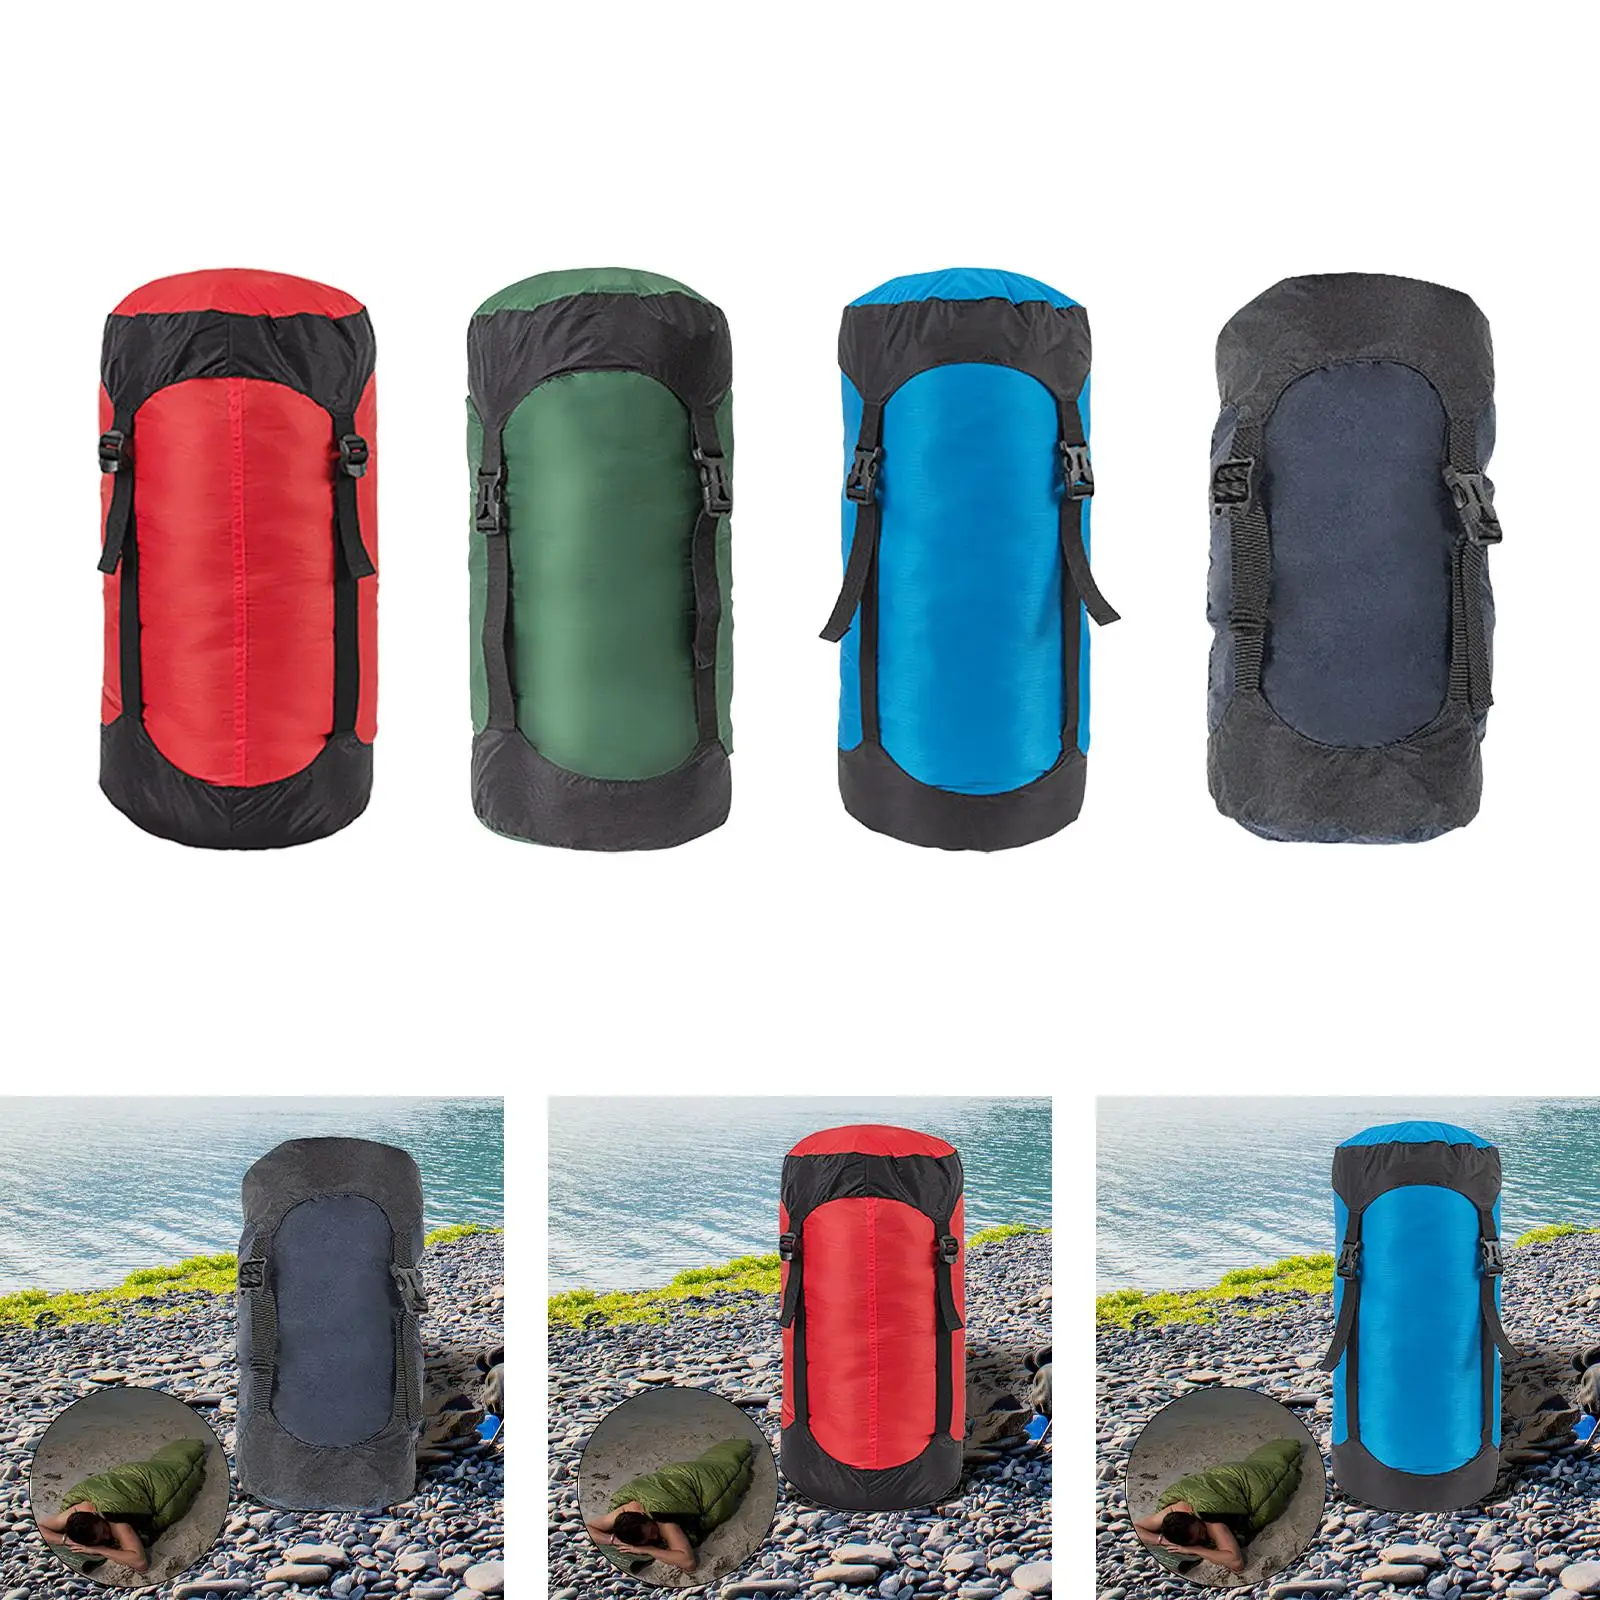 Portable Compression Stuff Sack Sleeping Bags with Dust Flap Compression Bag